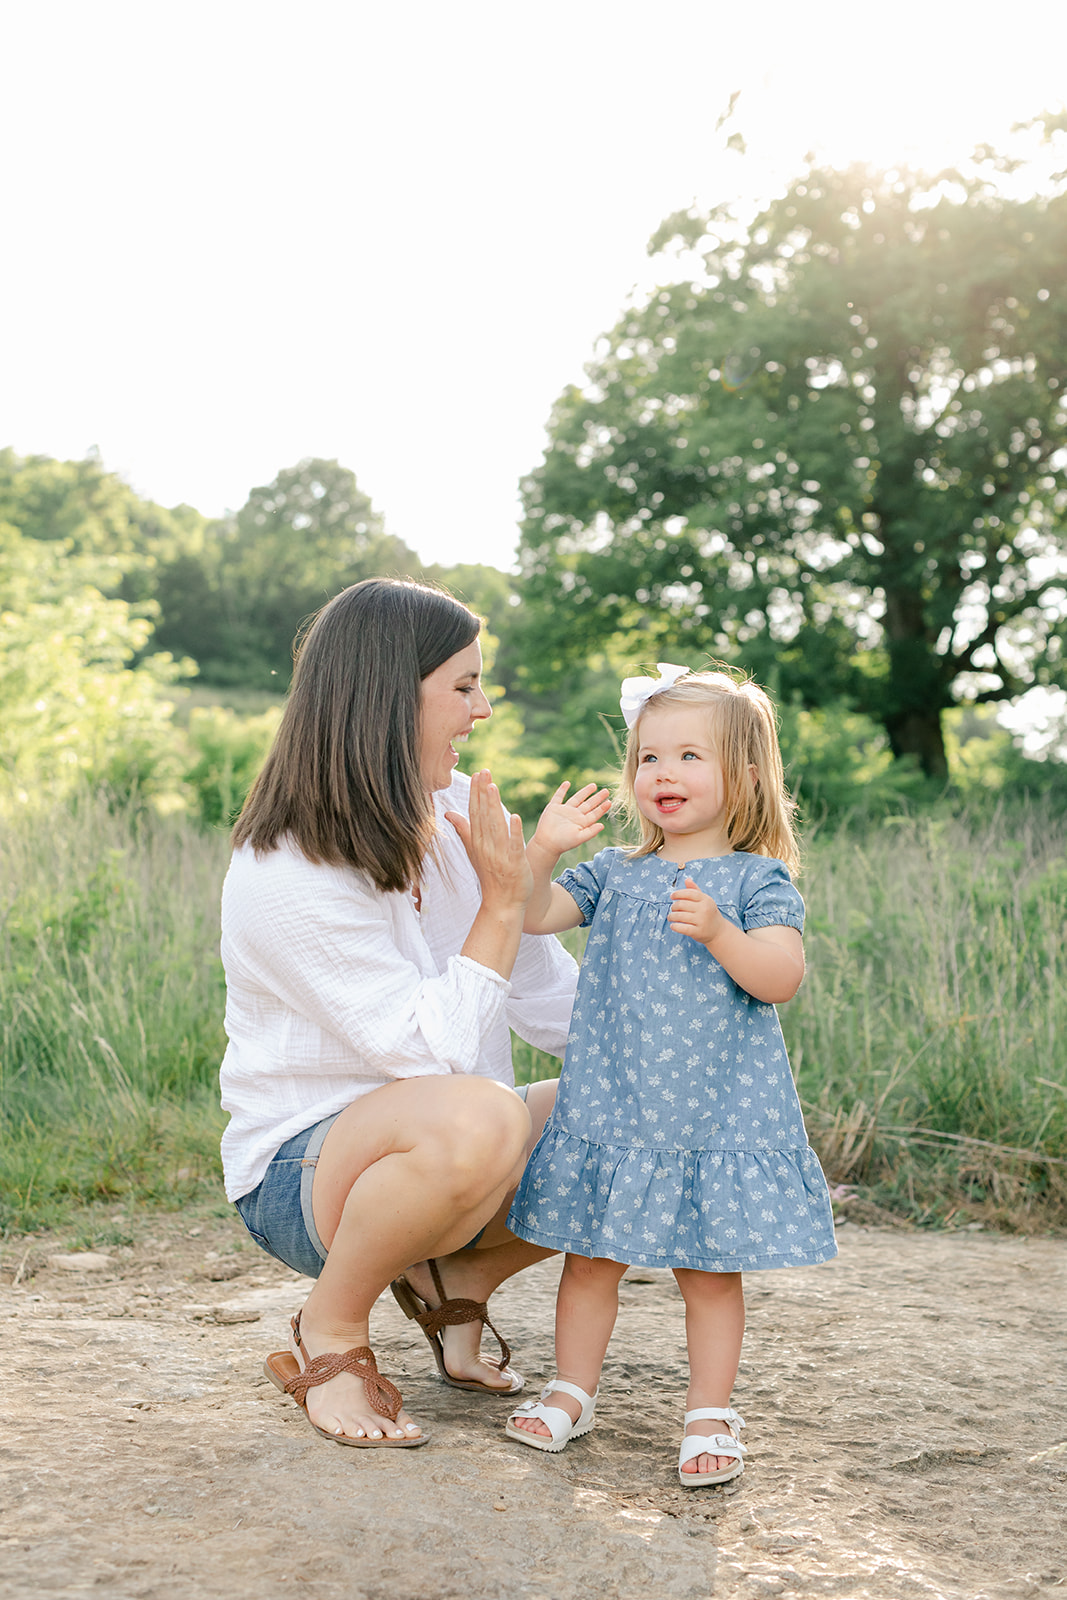 outdoor family photos for 2 year baby milestone session in nashville tennessee. photo of mom and daughter